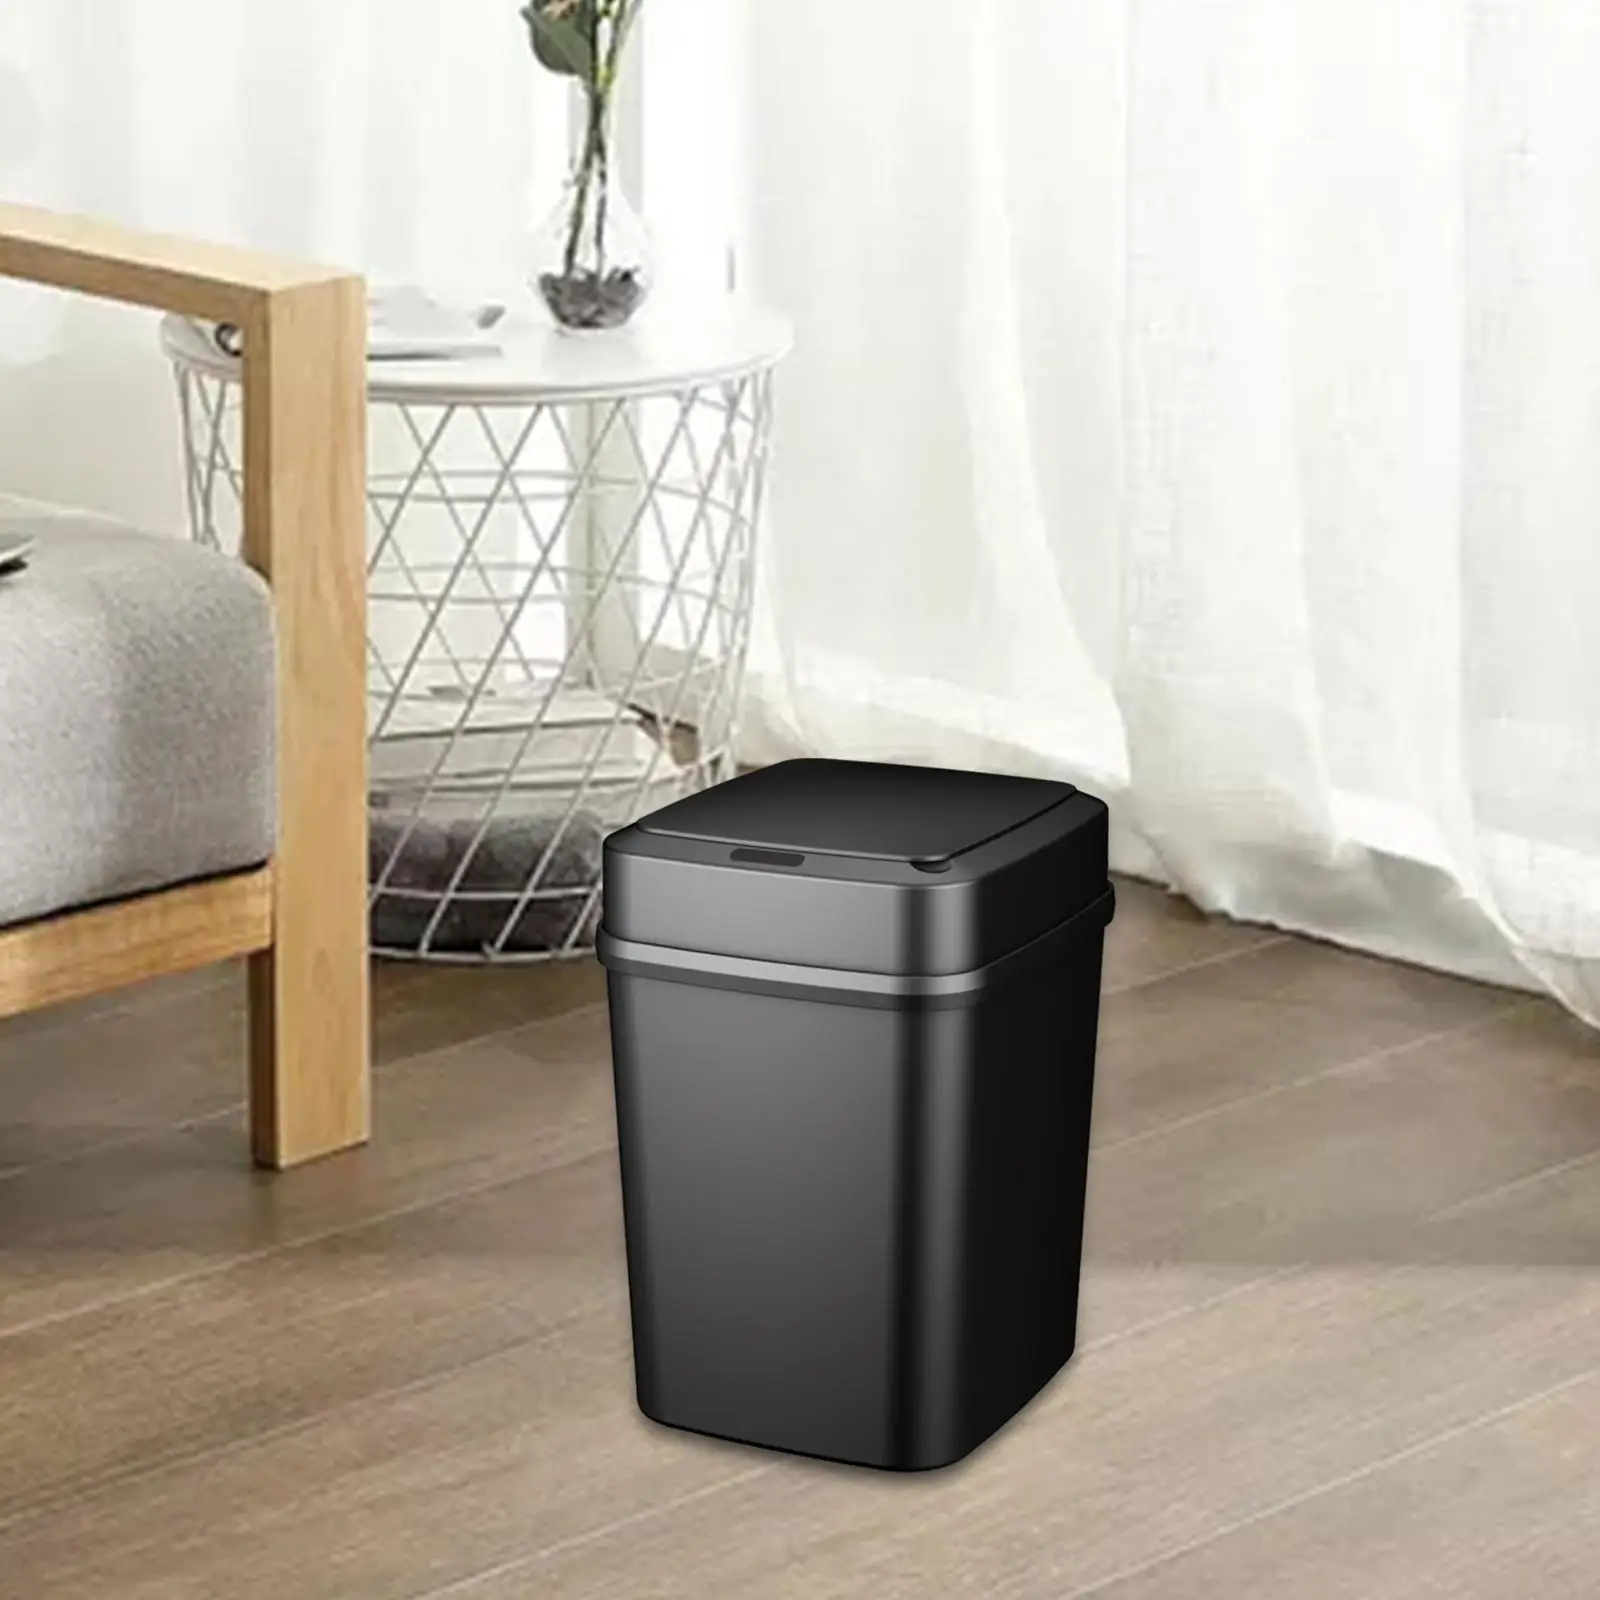 Bathroom Trash Cans with Lids Waste Bin Toilet Space Saving Automatic Garbage Can for Office Outdoor Bathroom Corner Living Room